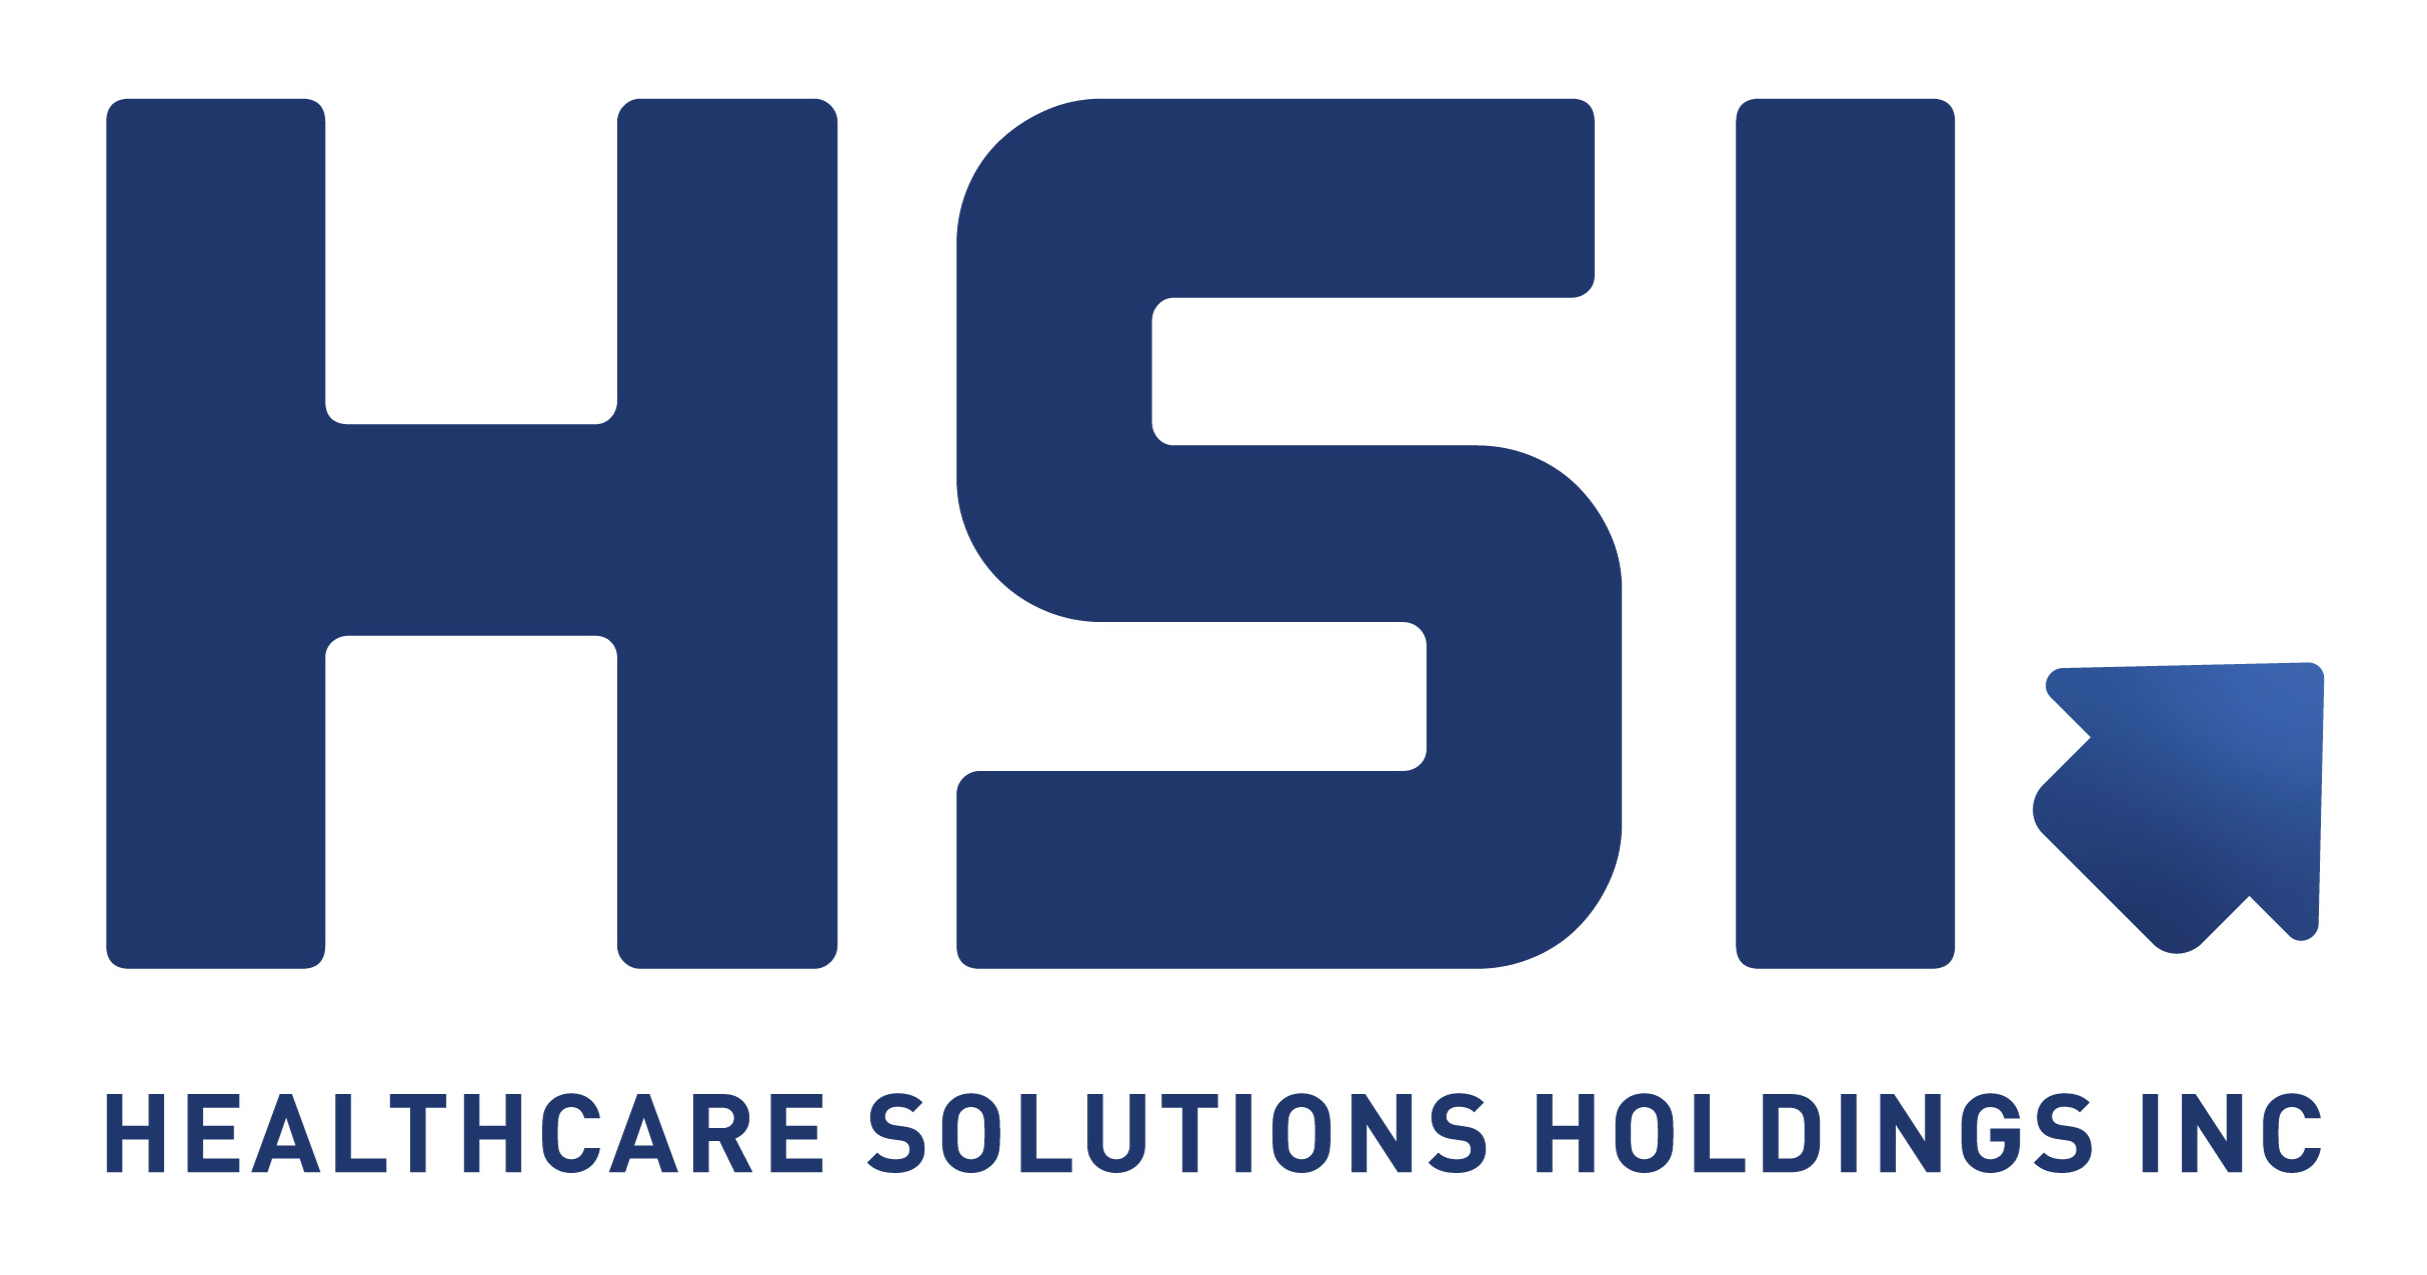 Healthcare Solutions Holdings Inc., Tuesday, July 2, 2019, Press release picture